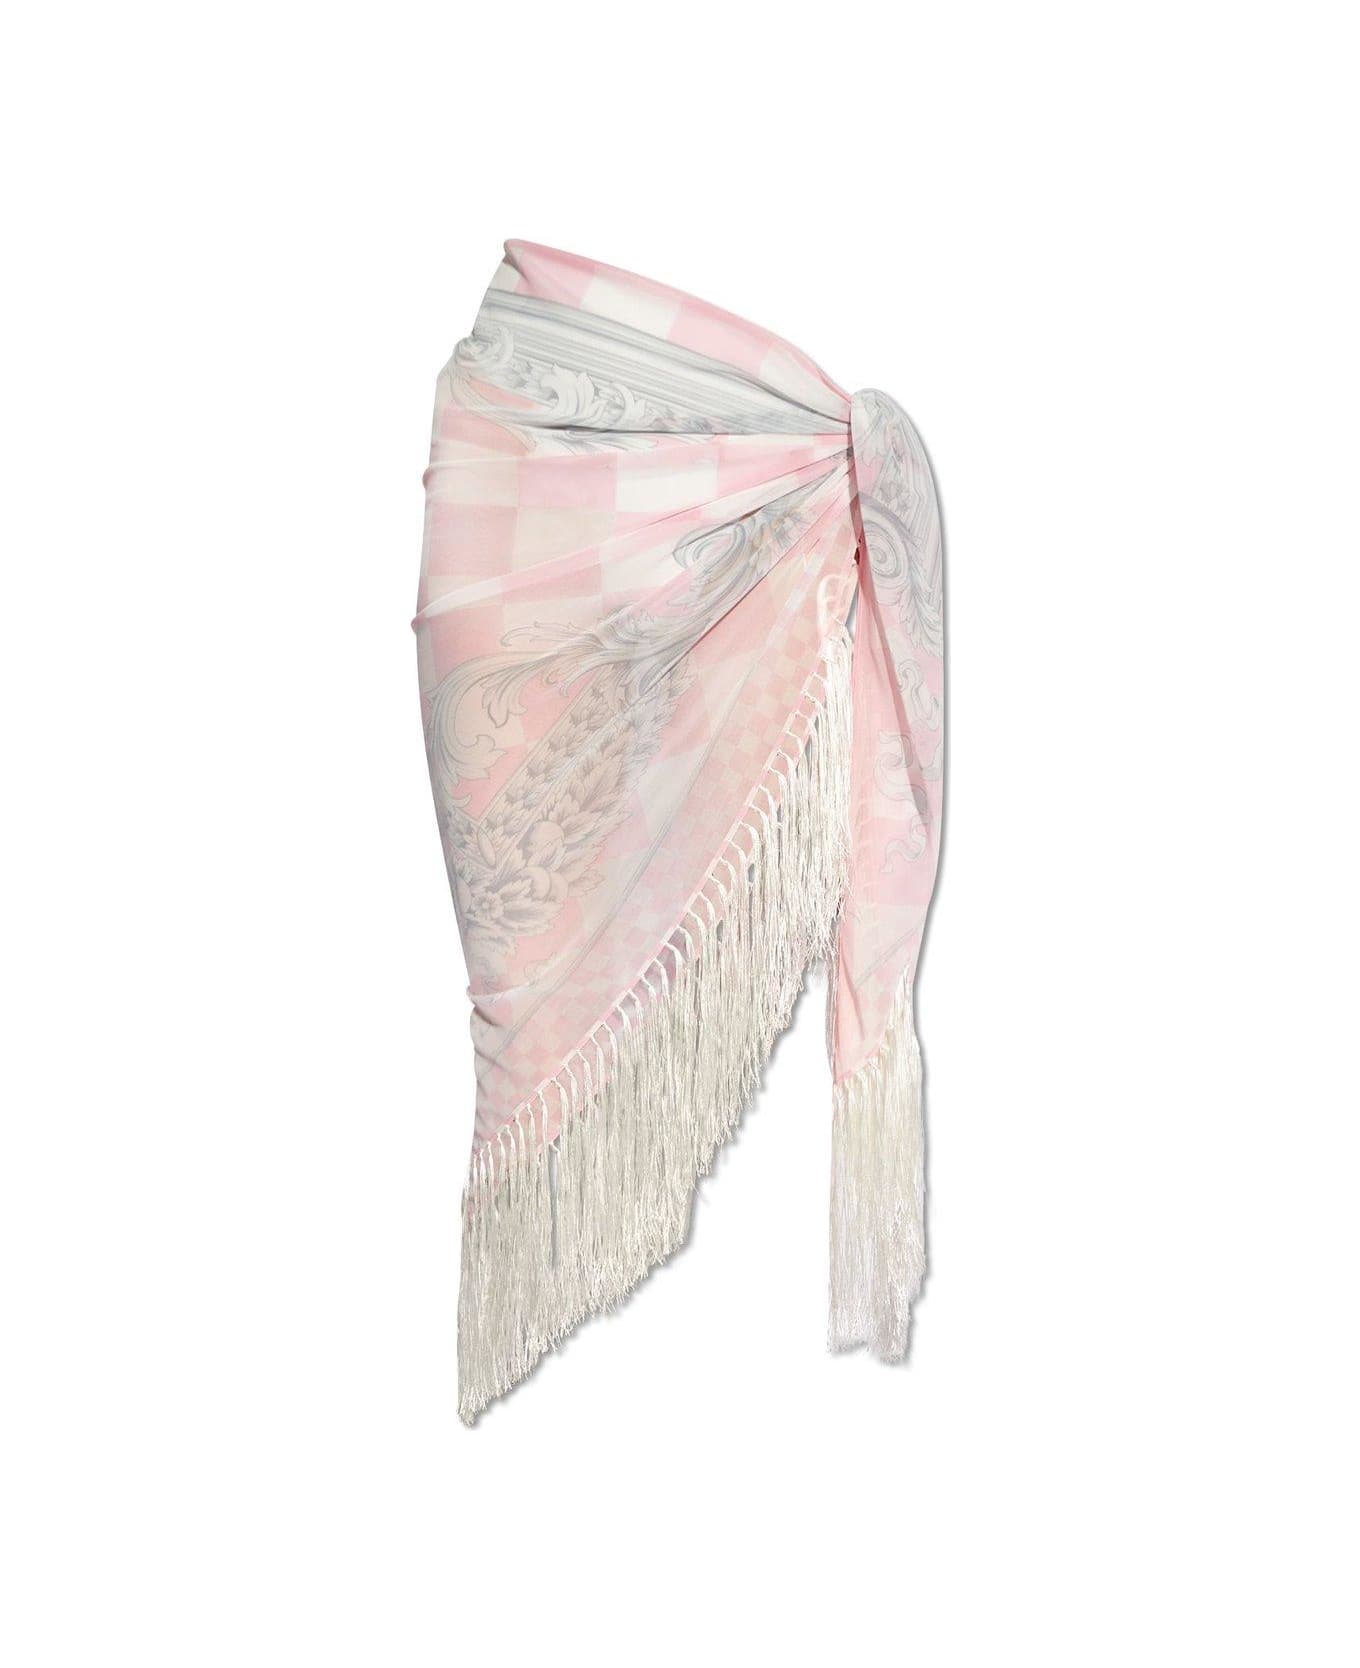 Versace Barocco-printed Fringed Cover-up - PINK/WHITE